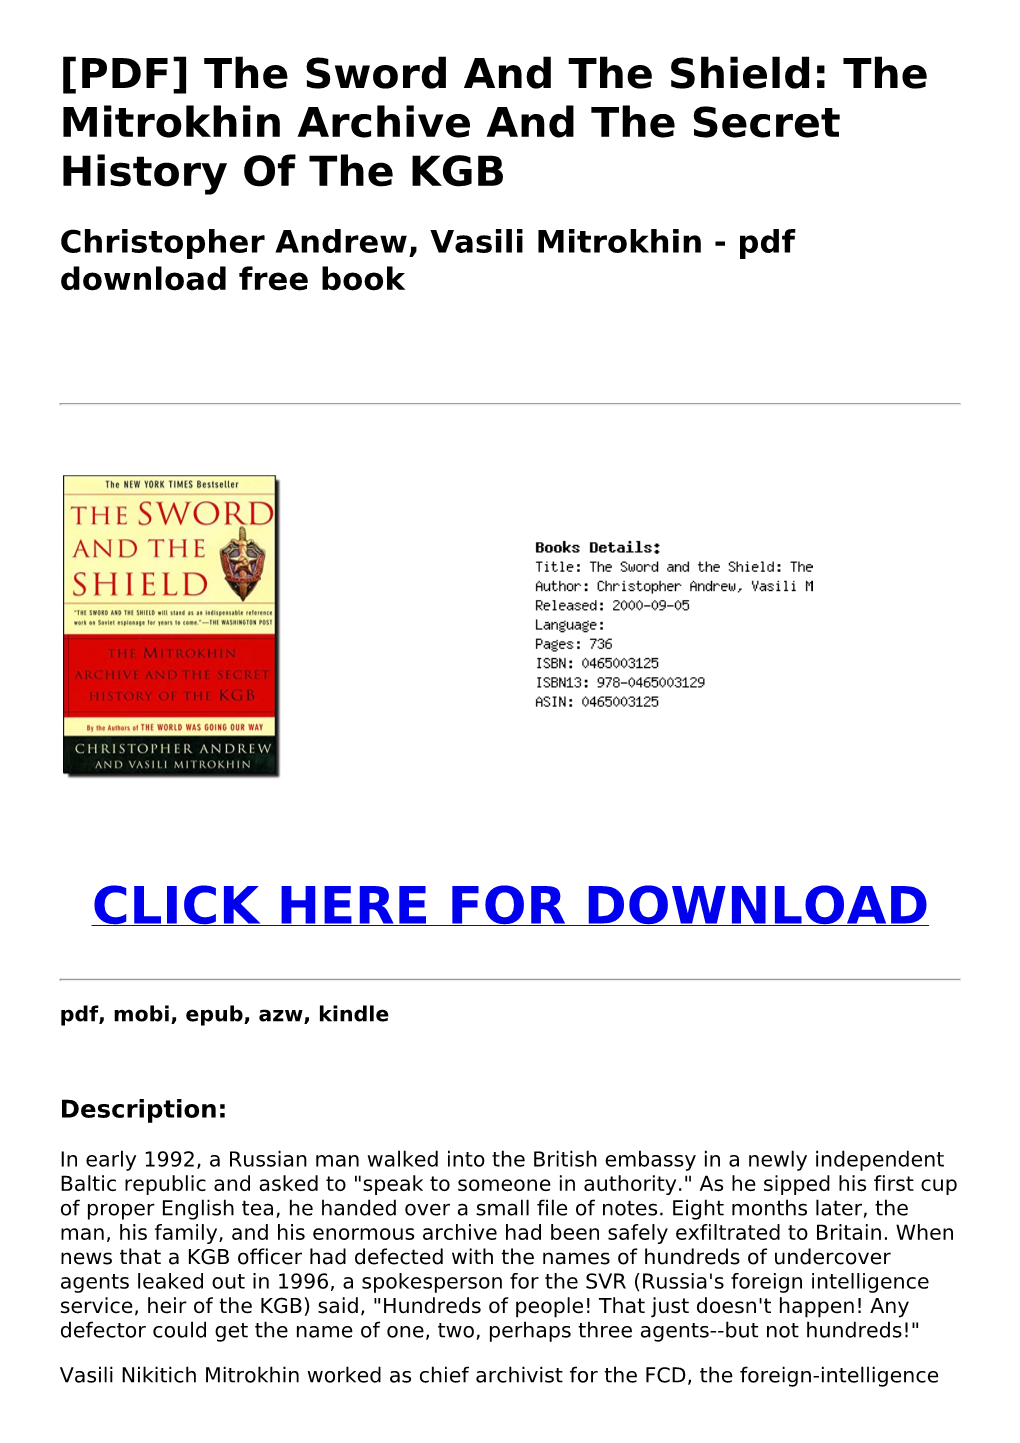 [PDF] the Sword and the Shield: the Mitrokhin Archive and the Secret History of the KGB